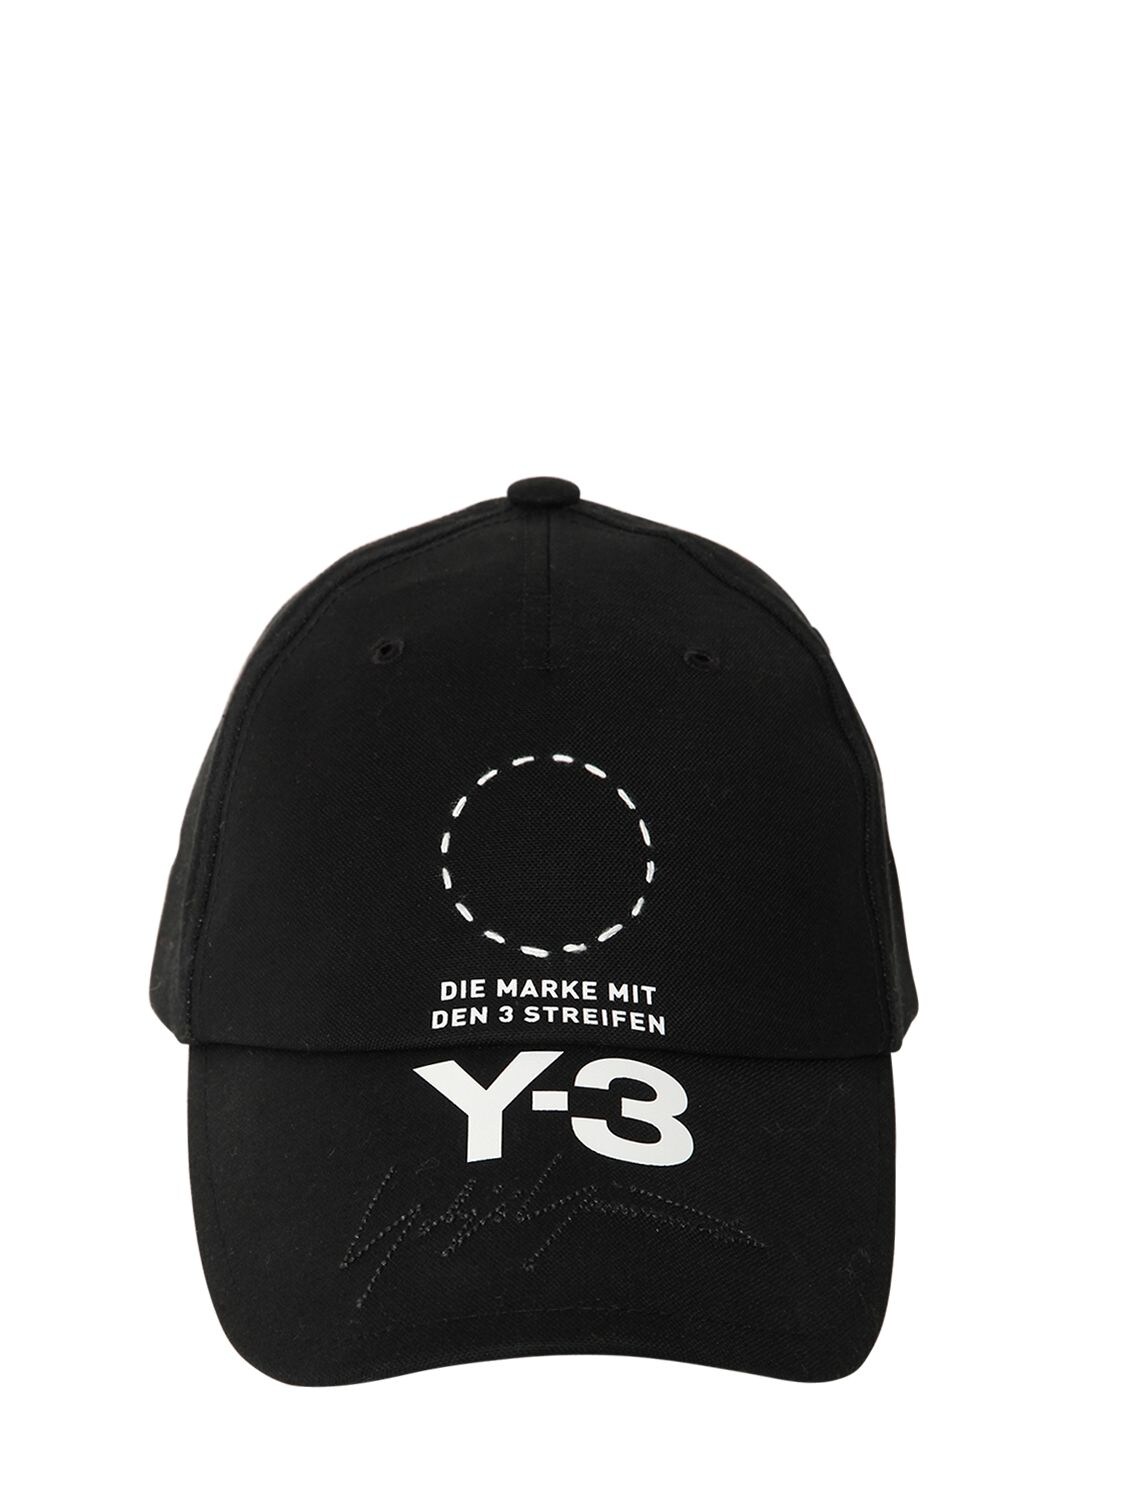 Y-3 STREET EMBROIDERED & PRINTED HAT,68IVWZ002-QkxBQ0s1